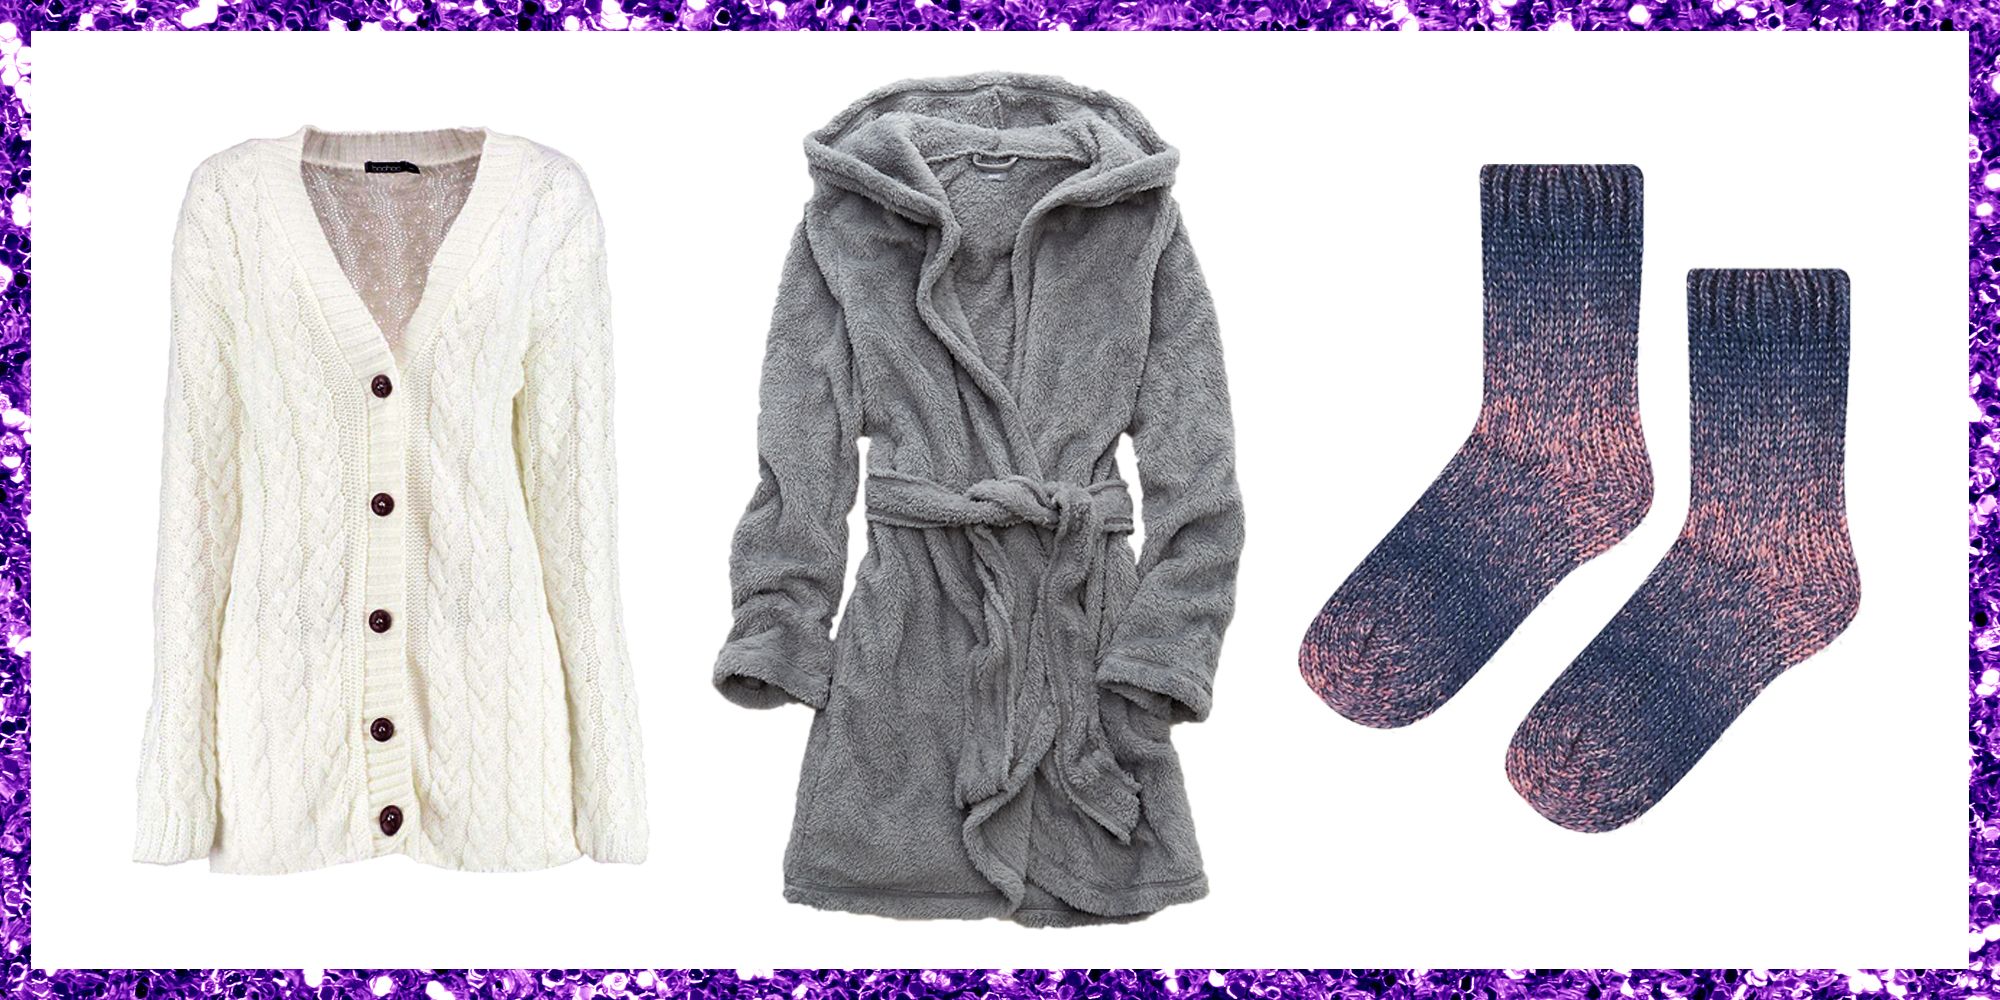 9 Cozy Clothing Pieces for Winter - Warm Clothes for Winter